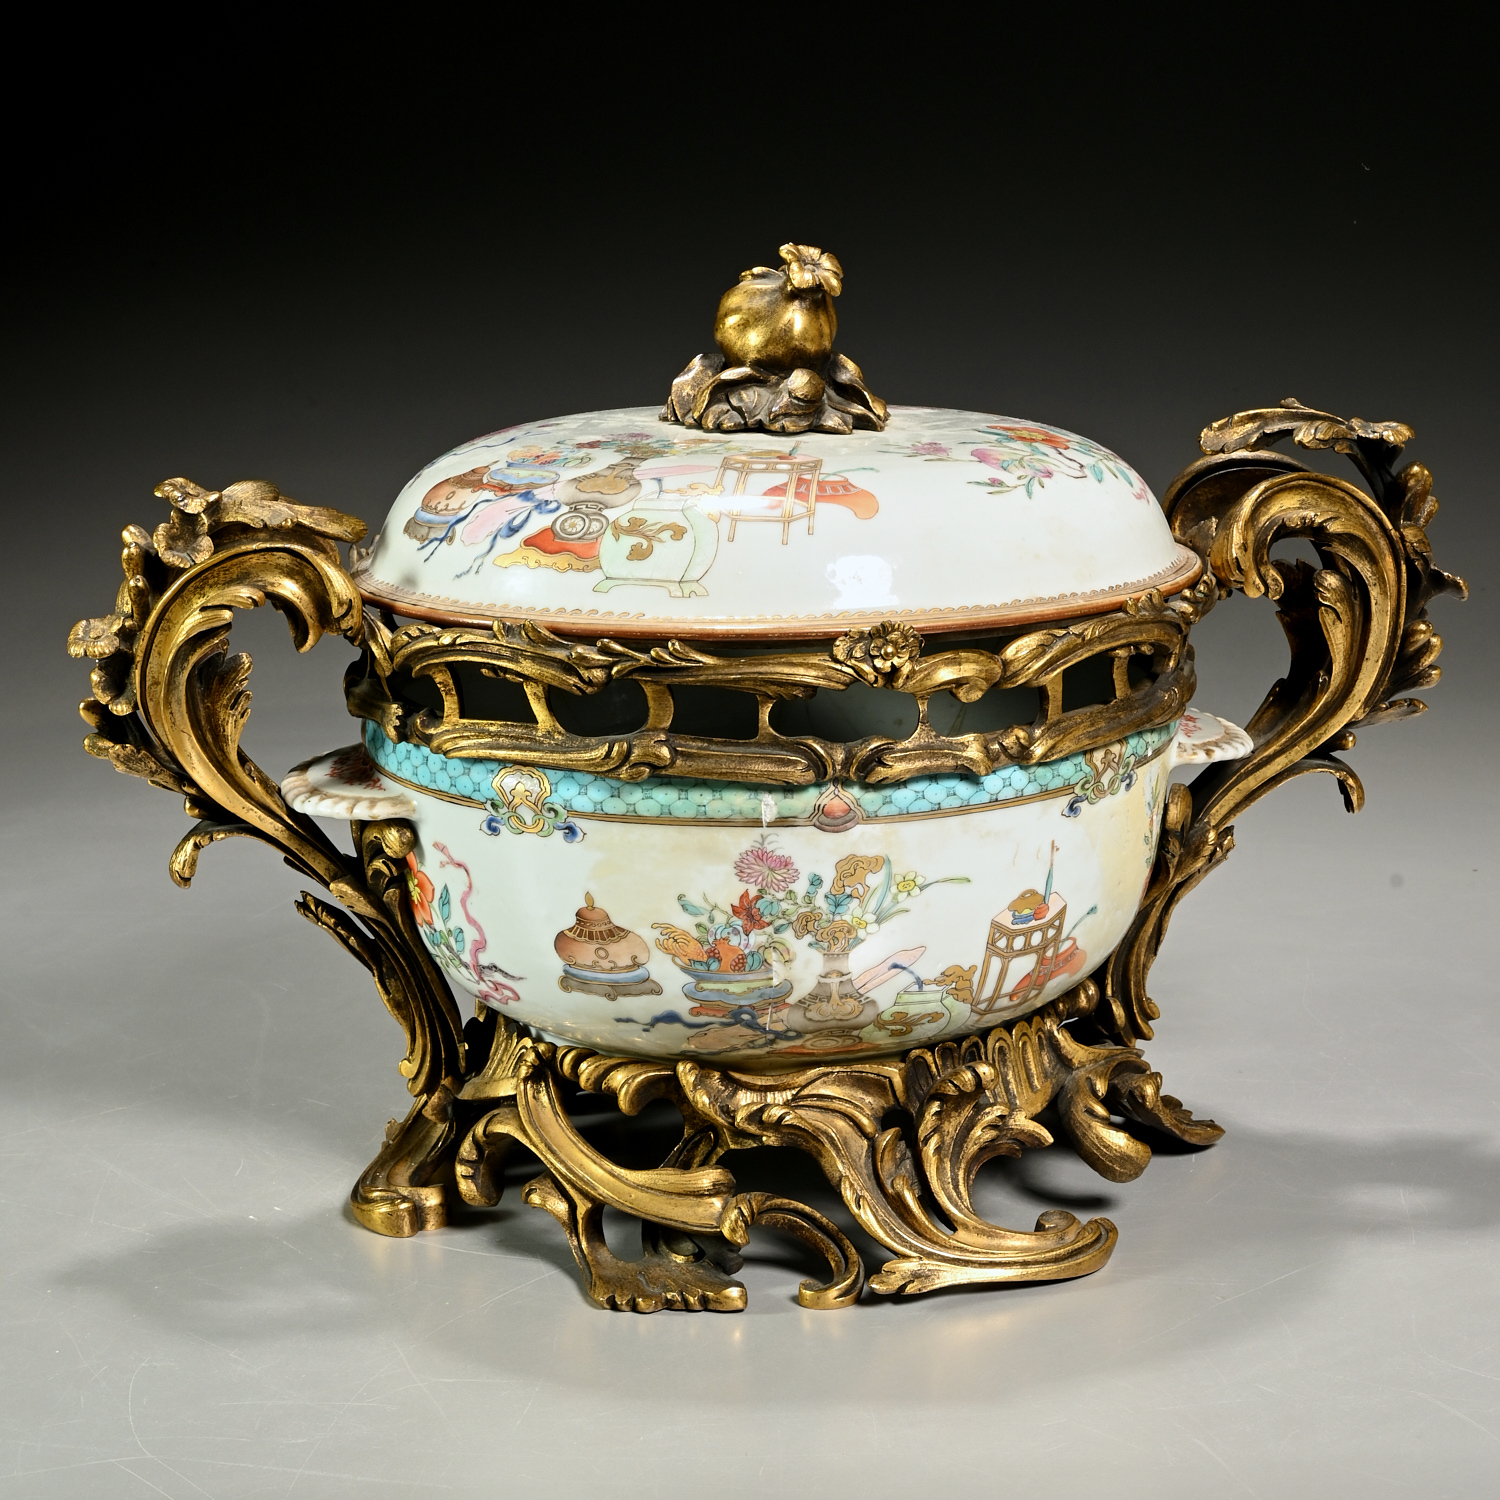 CHINESE BRONZE MOUNTED PORCELAIN